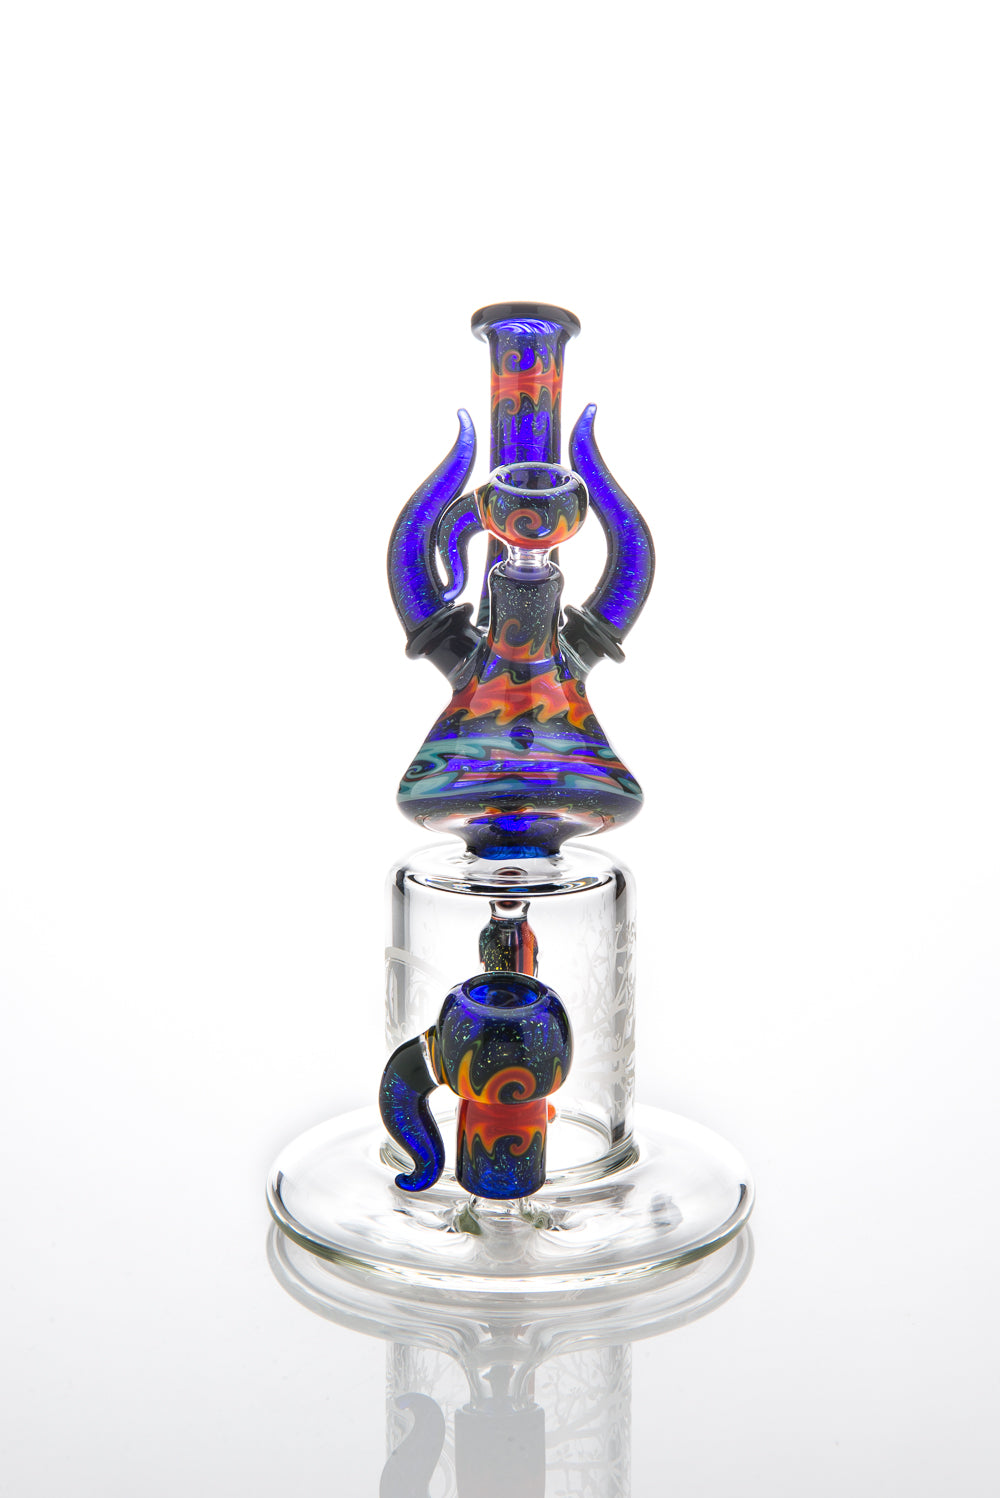 En4cer Vapor Bubbler with Mini Tube Mouthpiece Collaboration by Andy G and 4.0